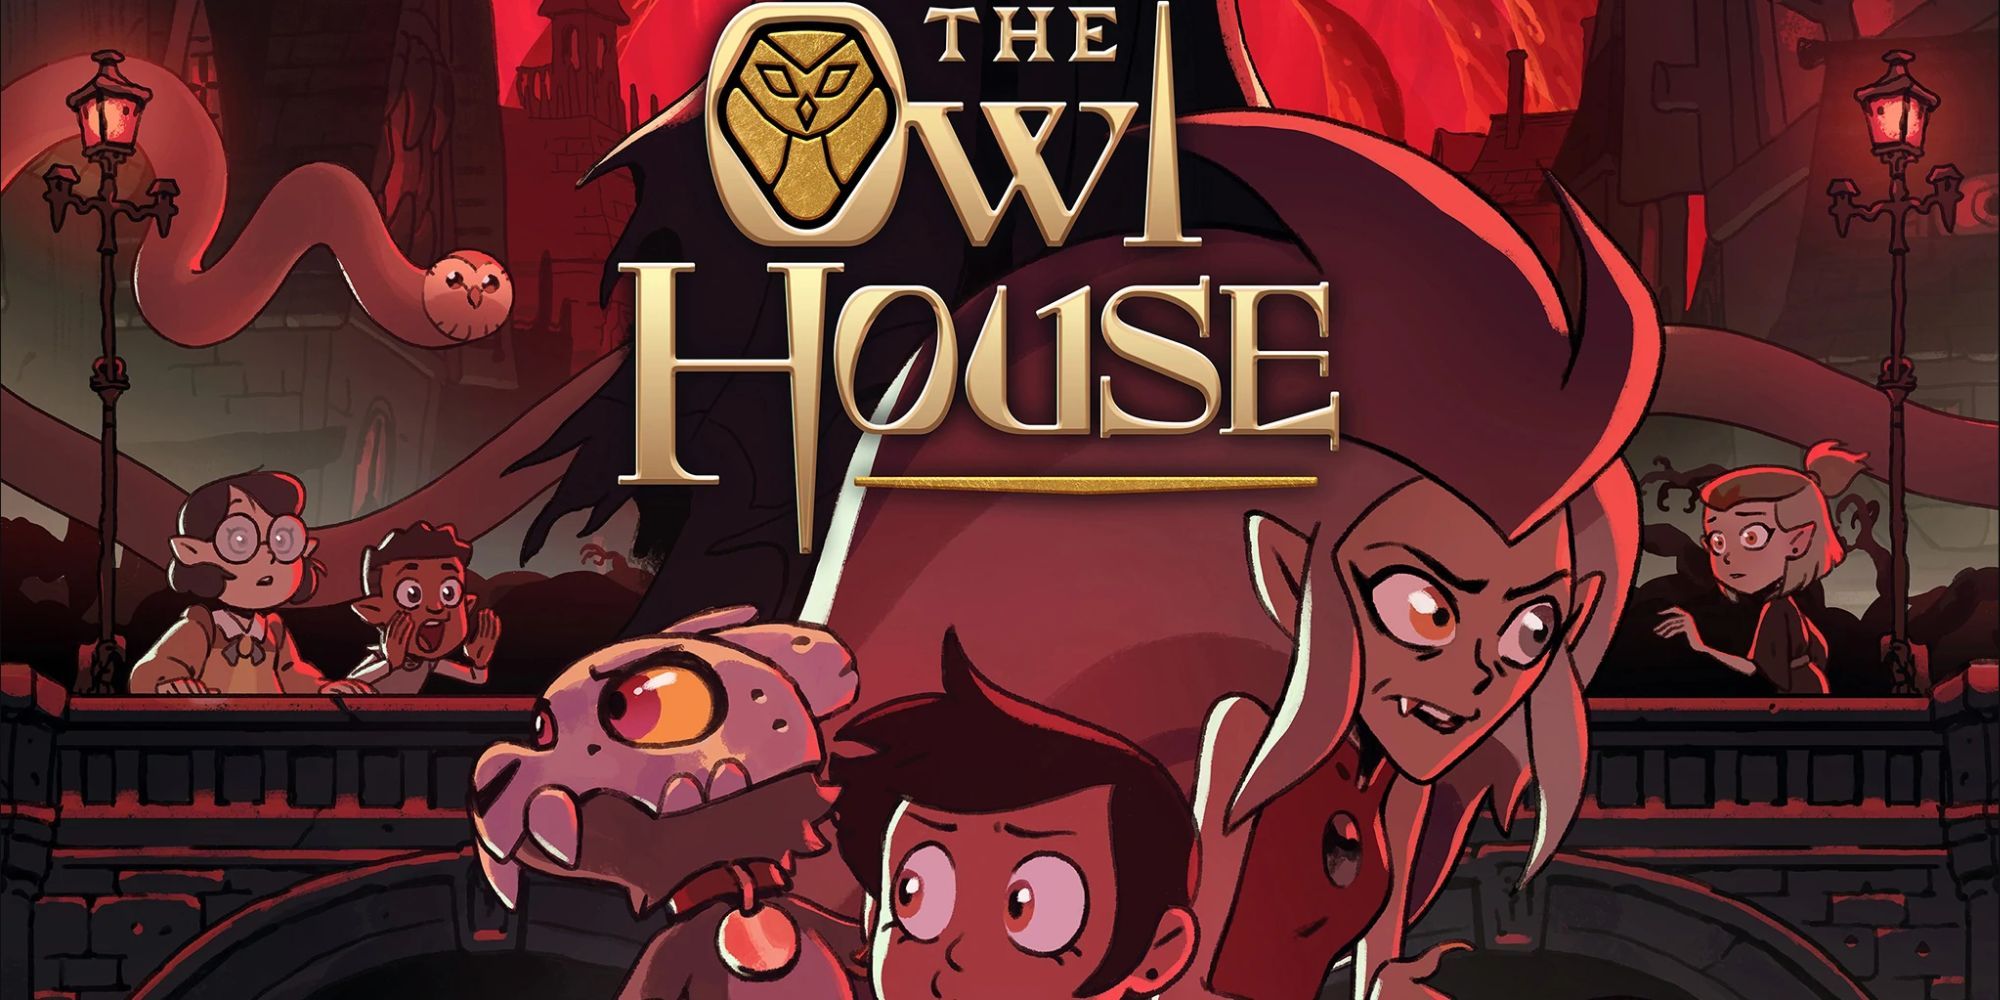 The Owl House” Season 3 Premiere Special Trailer Released – What's